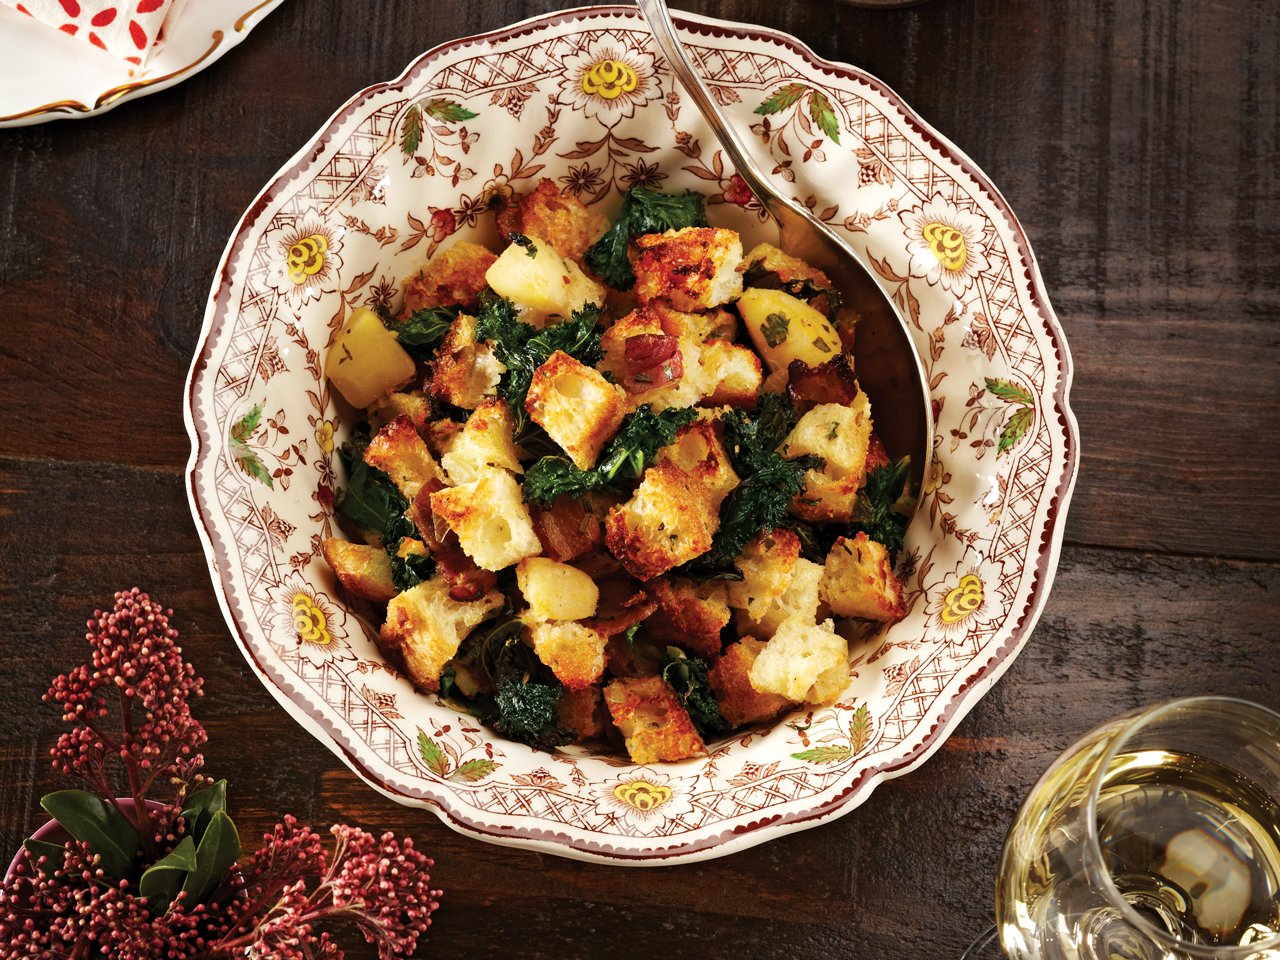 Rustic Kale and Bacon Stuffing